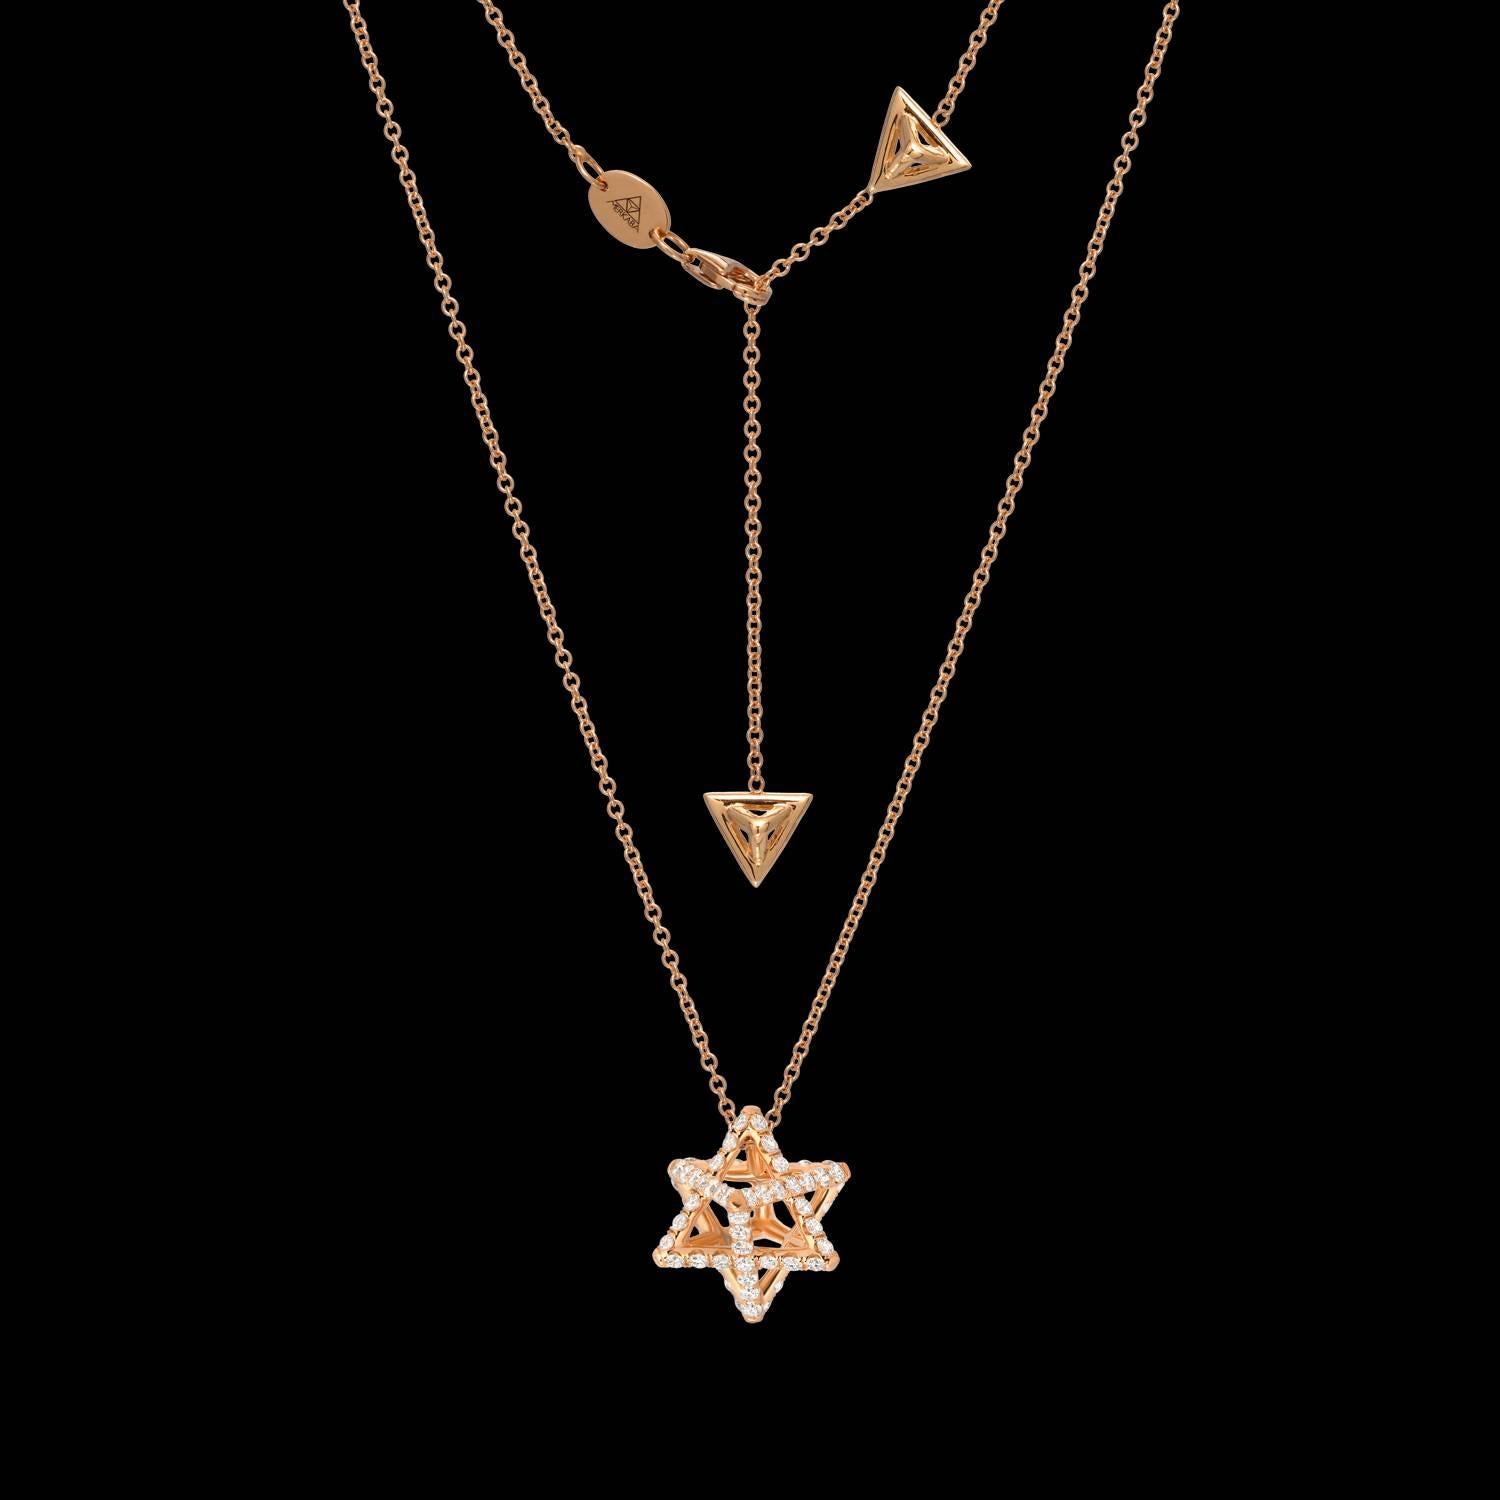 18k rose gold Merkaba star necklace, featuring a total of approximately 0.97ct carats of round brilliant diamonds, F-G color and VVS2-VS1 clarity. This heirloom-quality, sacred geometric jewelry piece, suspends elegantly at the chest, measuring